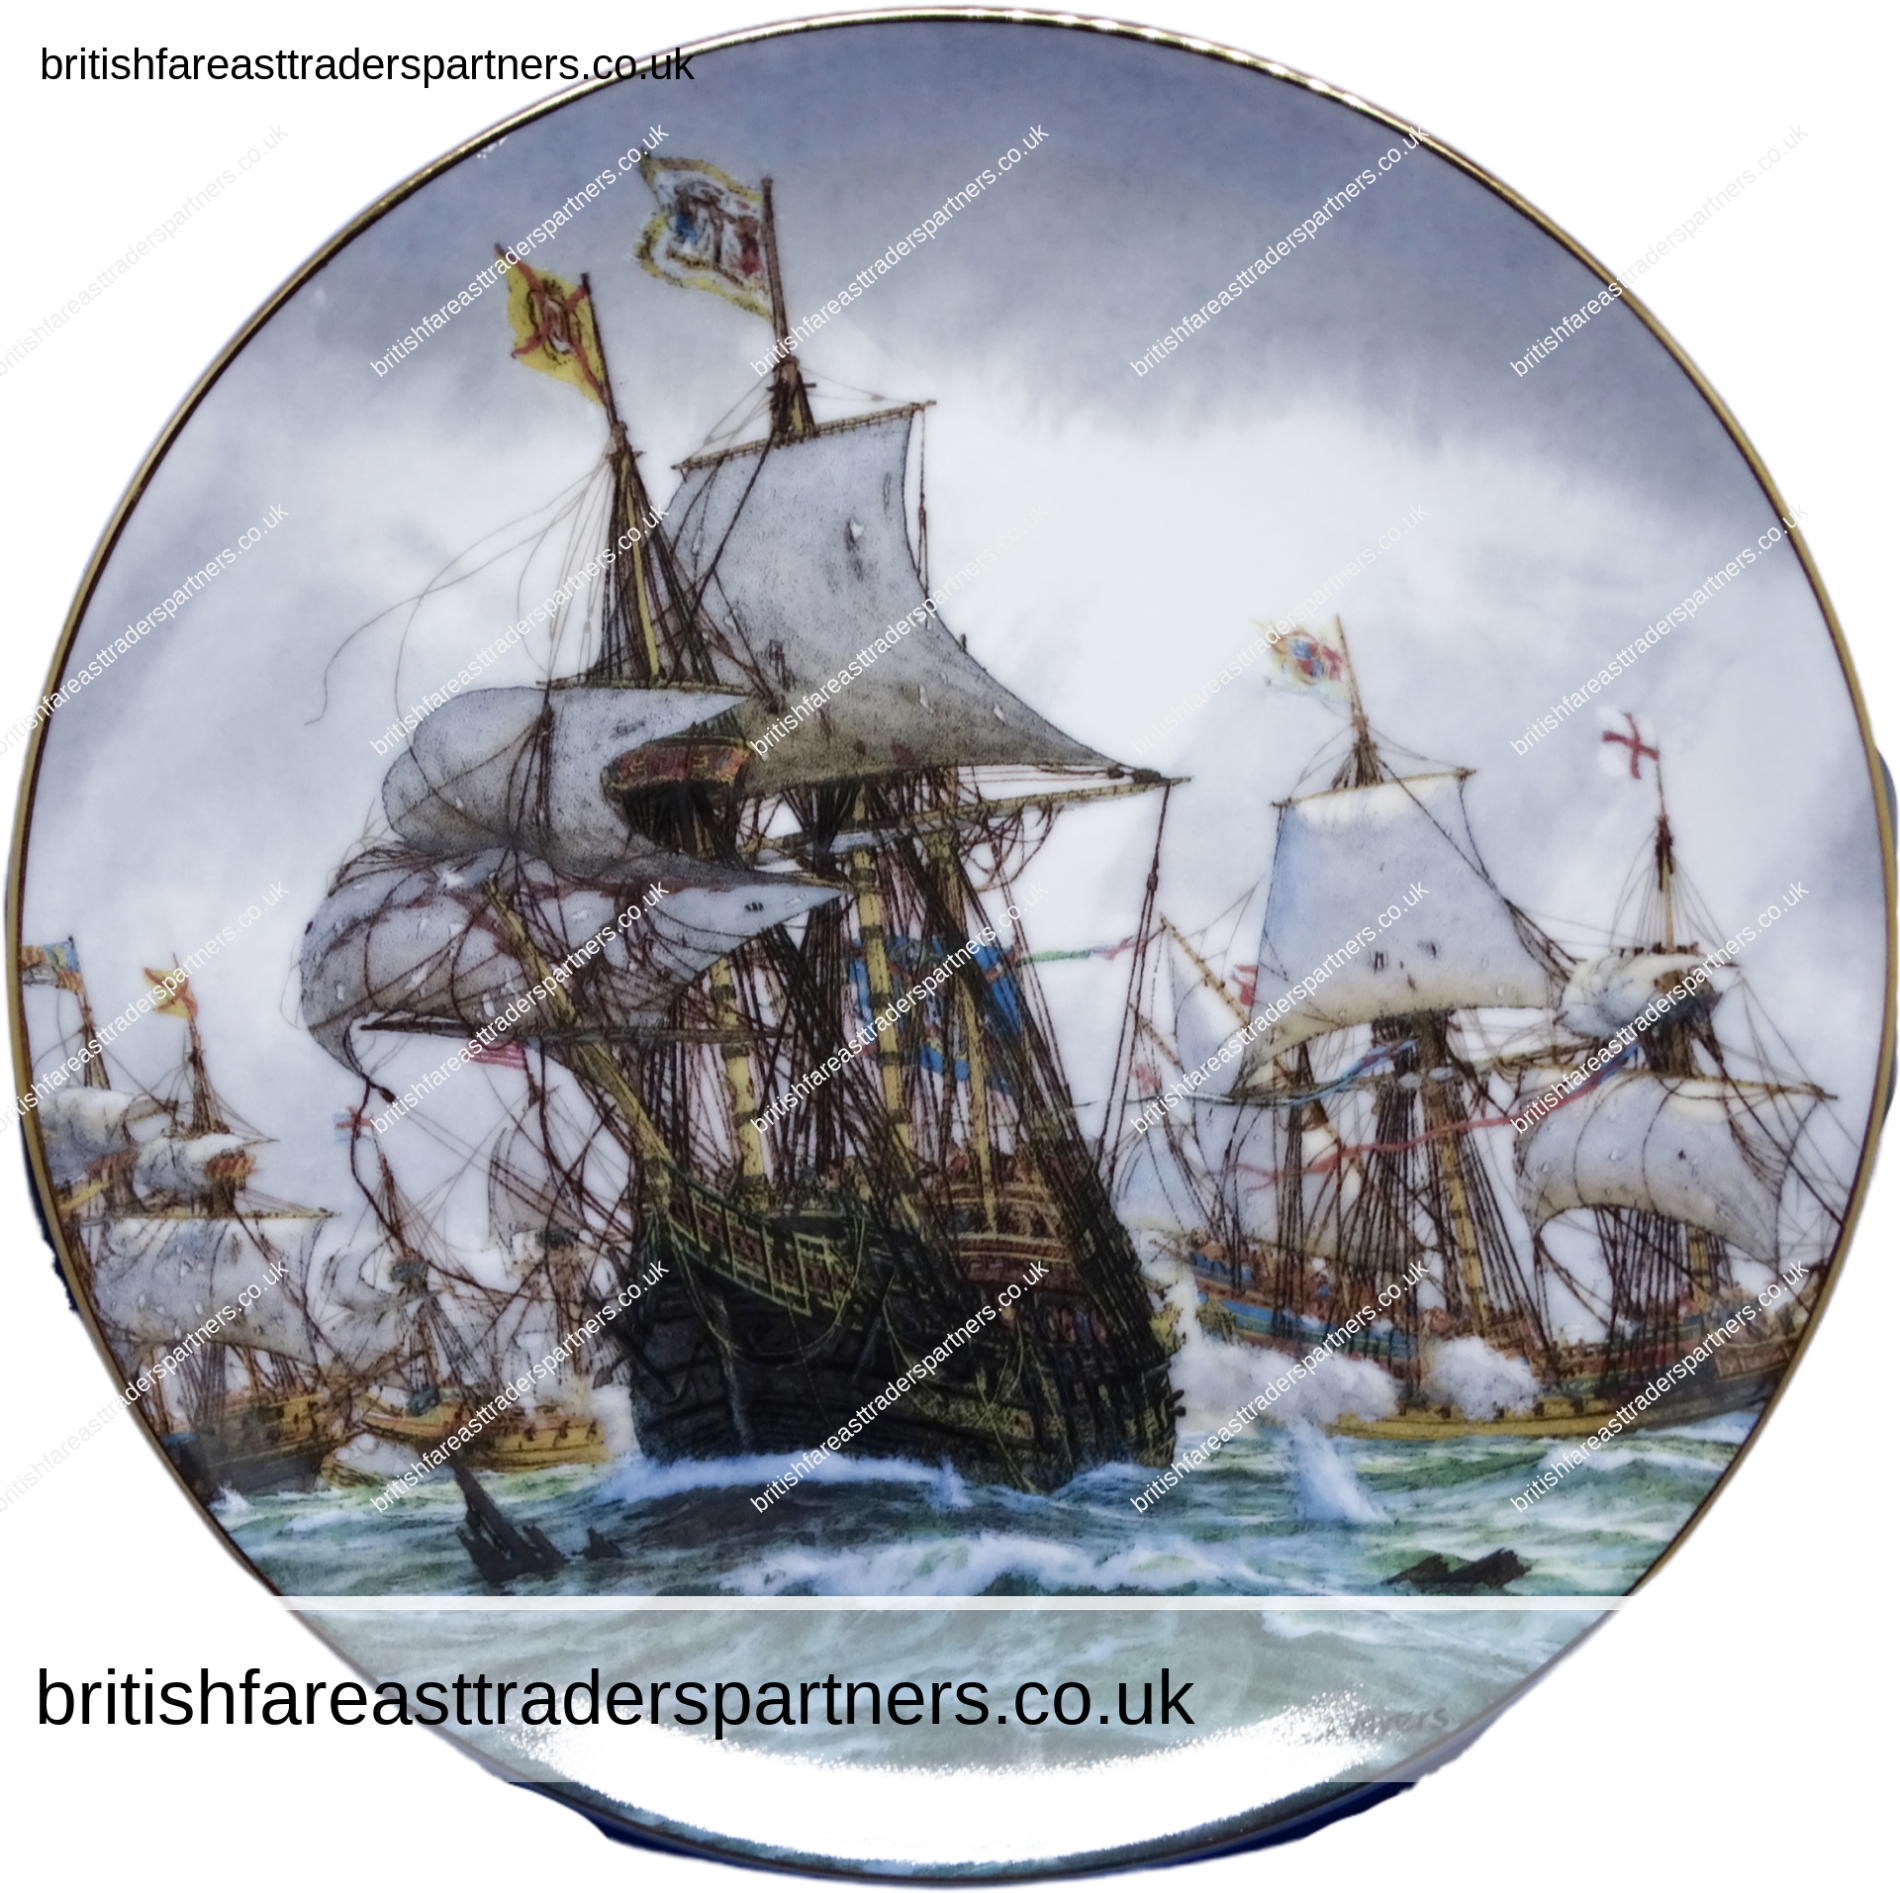 VINTAGE HAMILTON COLLECTION PLATE THE BATTLE OFF GRAVELINES THE SPANISH ARMADA (8TH AUGUST, 1588) “GREAT BRITISH SEA BATTLES” BY MARK MYERS VINTAGE | COLLECTABLES | DECORATIVE PLATES | ENGLISH / ENGLAND  | FINE PORCELAIN | TRANSPORT | SAILING | SHIPS | NAVAL / NAUTICAL / MARITIME |  LIFESTYLE | HERITAGE | HISTORY | CULTURE